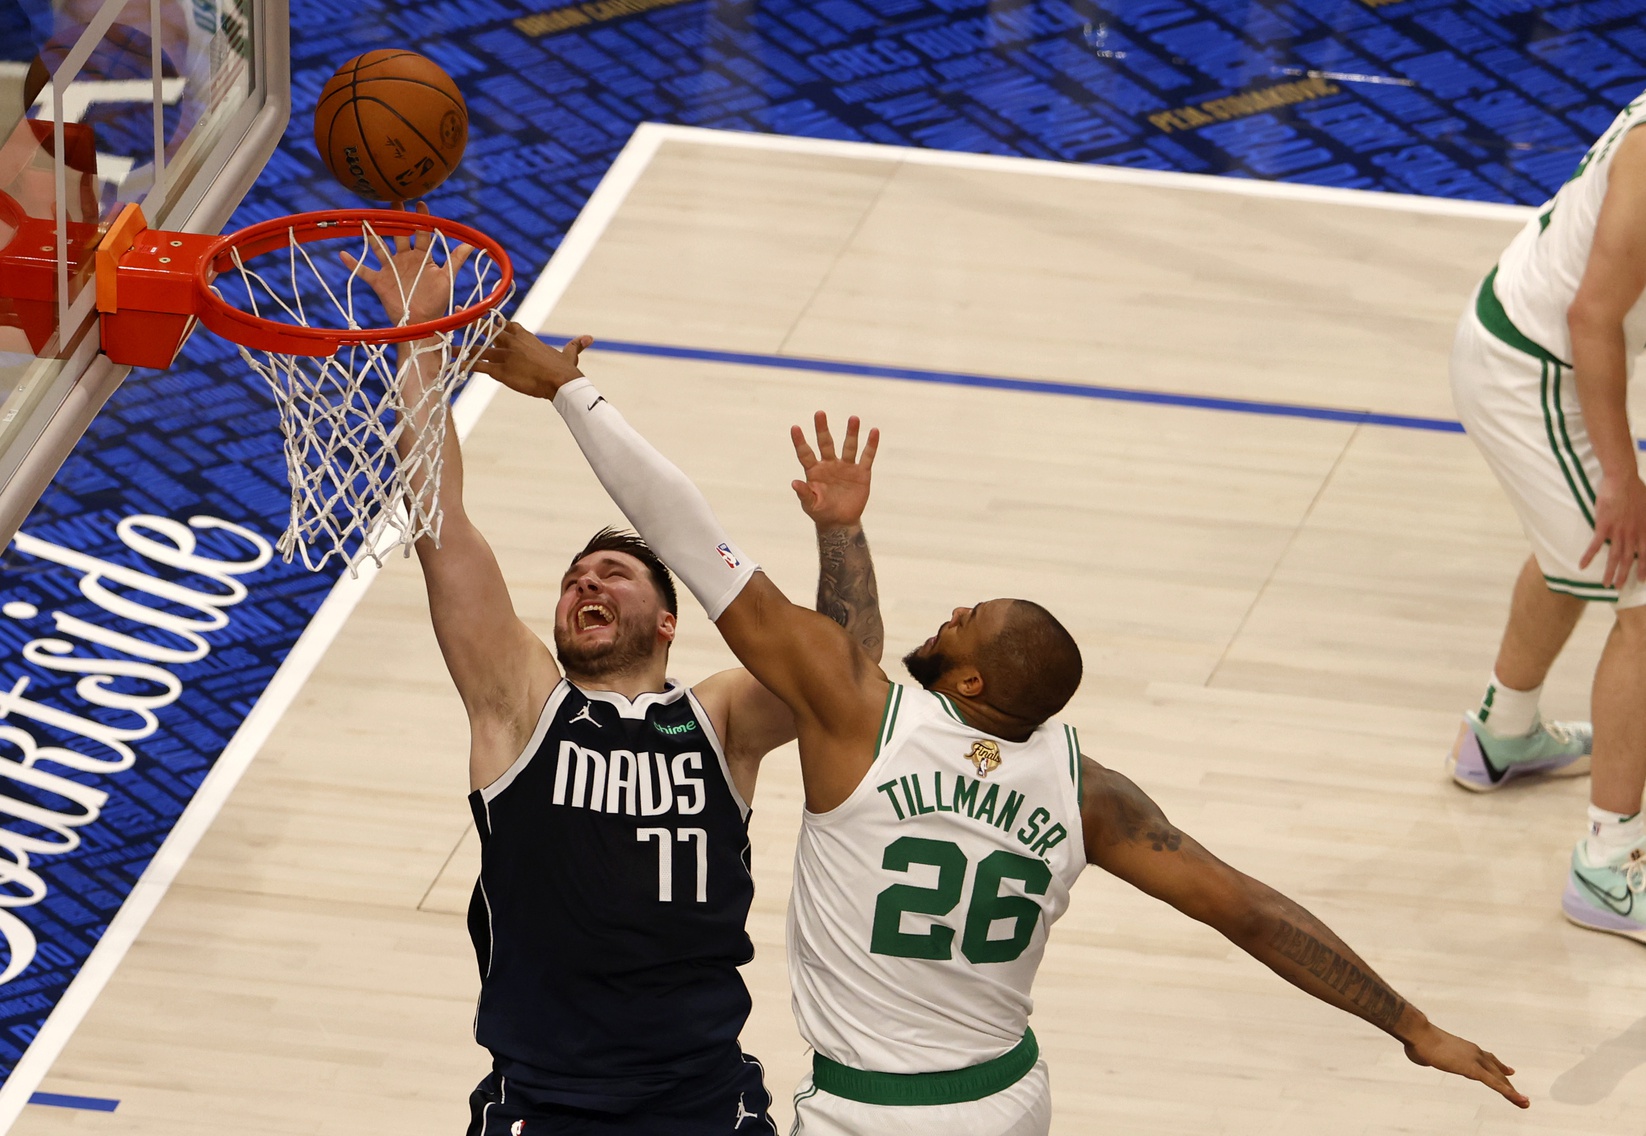 Former Michigan State star Xavier Tillman defends a layup by Luka Doncic.